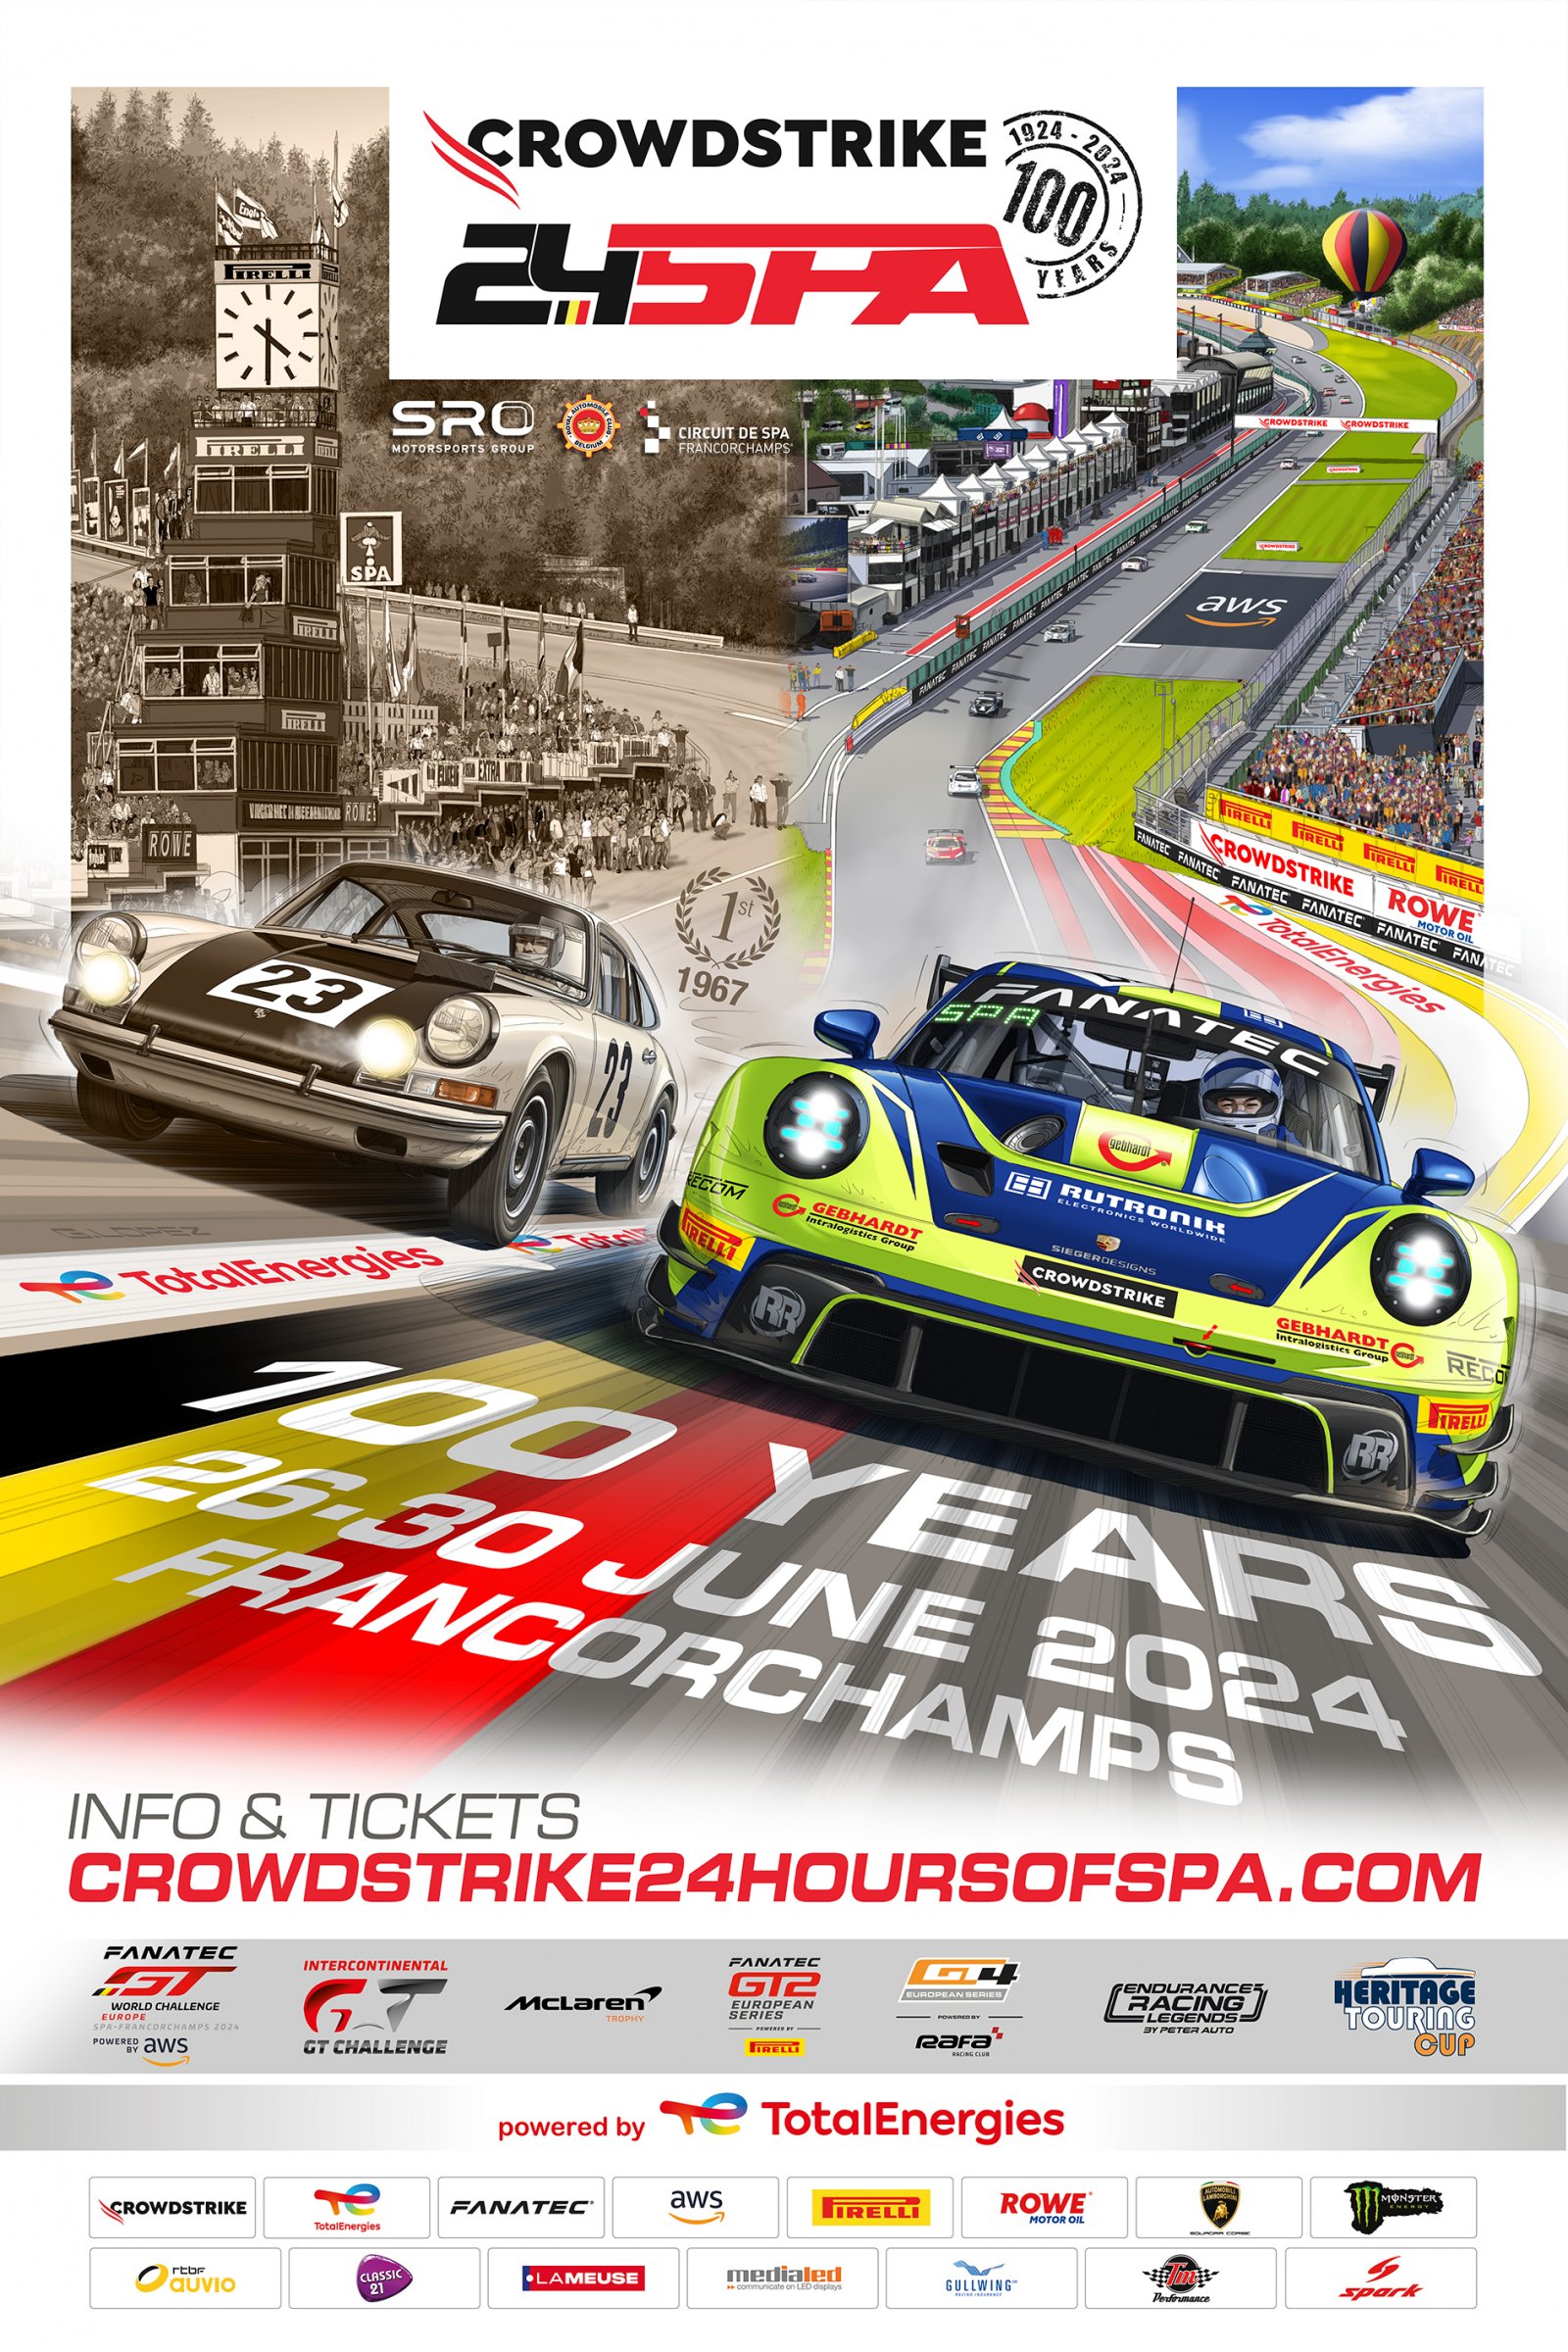 Poster 2/10: Porsche’s maiden victory in the spotlight to celebrate centenary CrowdStrike 24 Hours of Spa